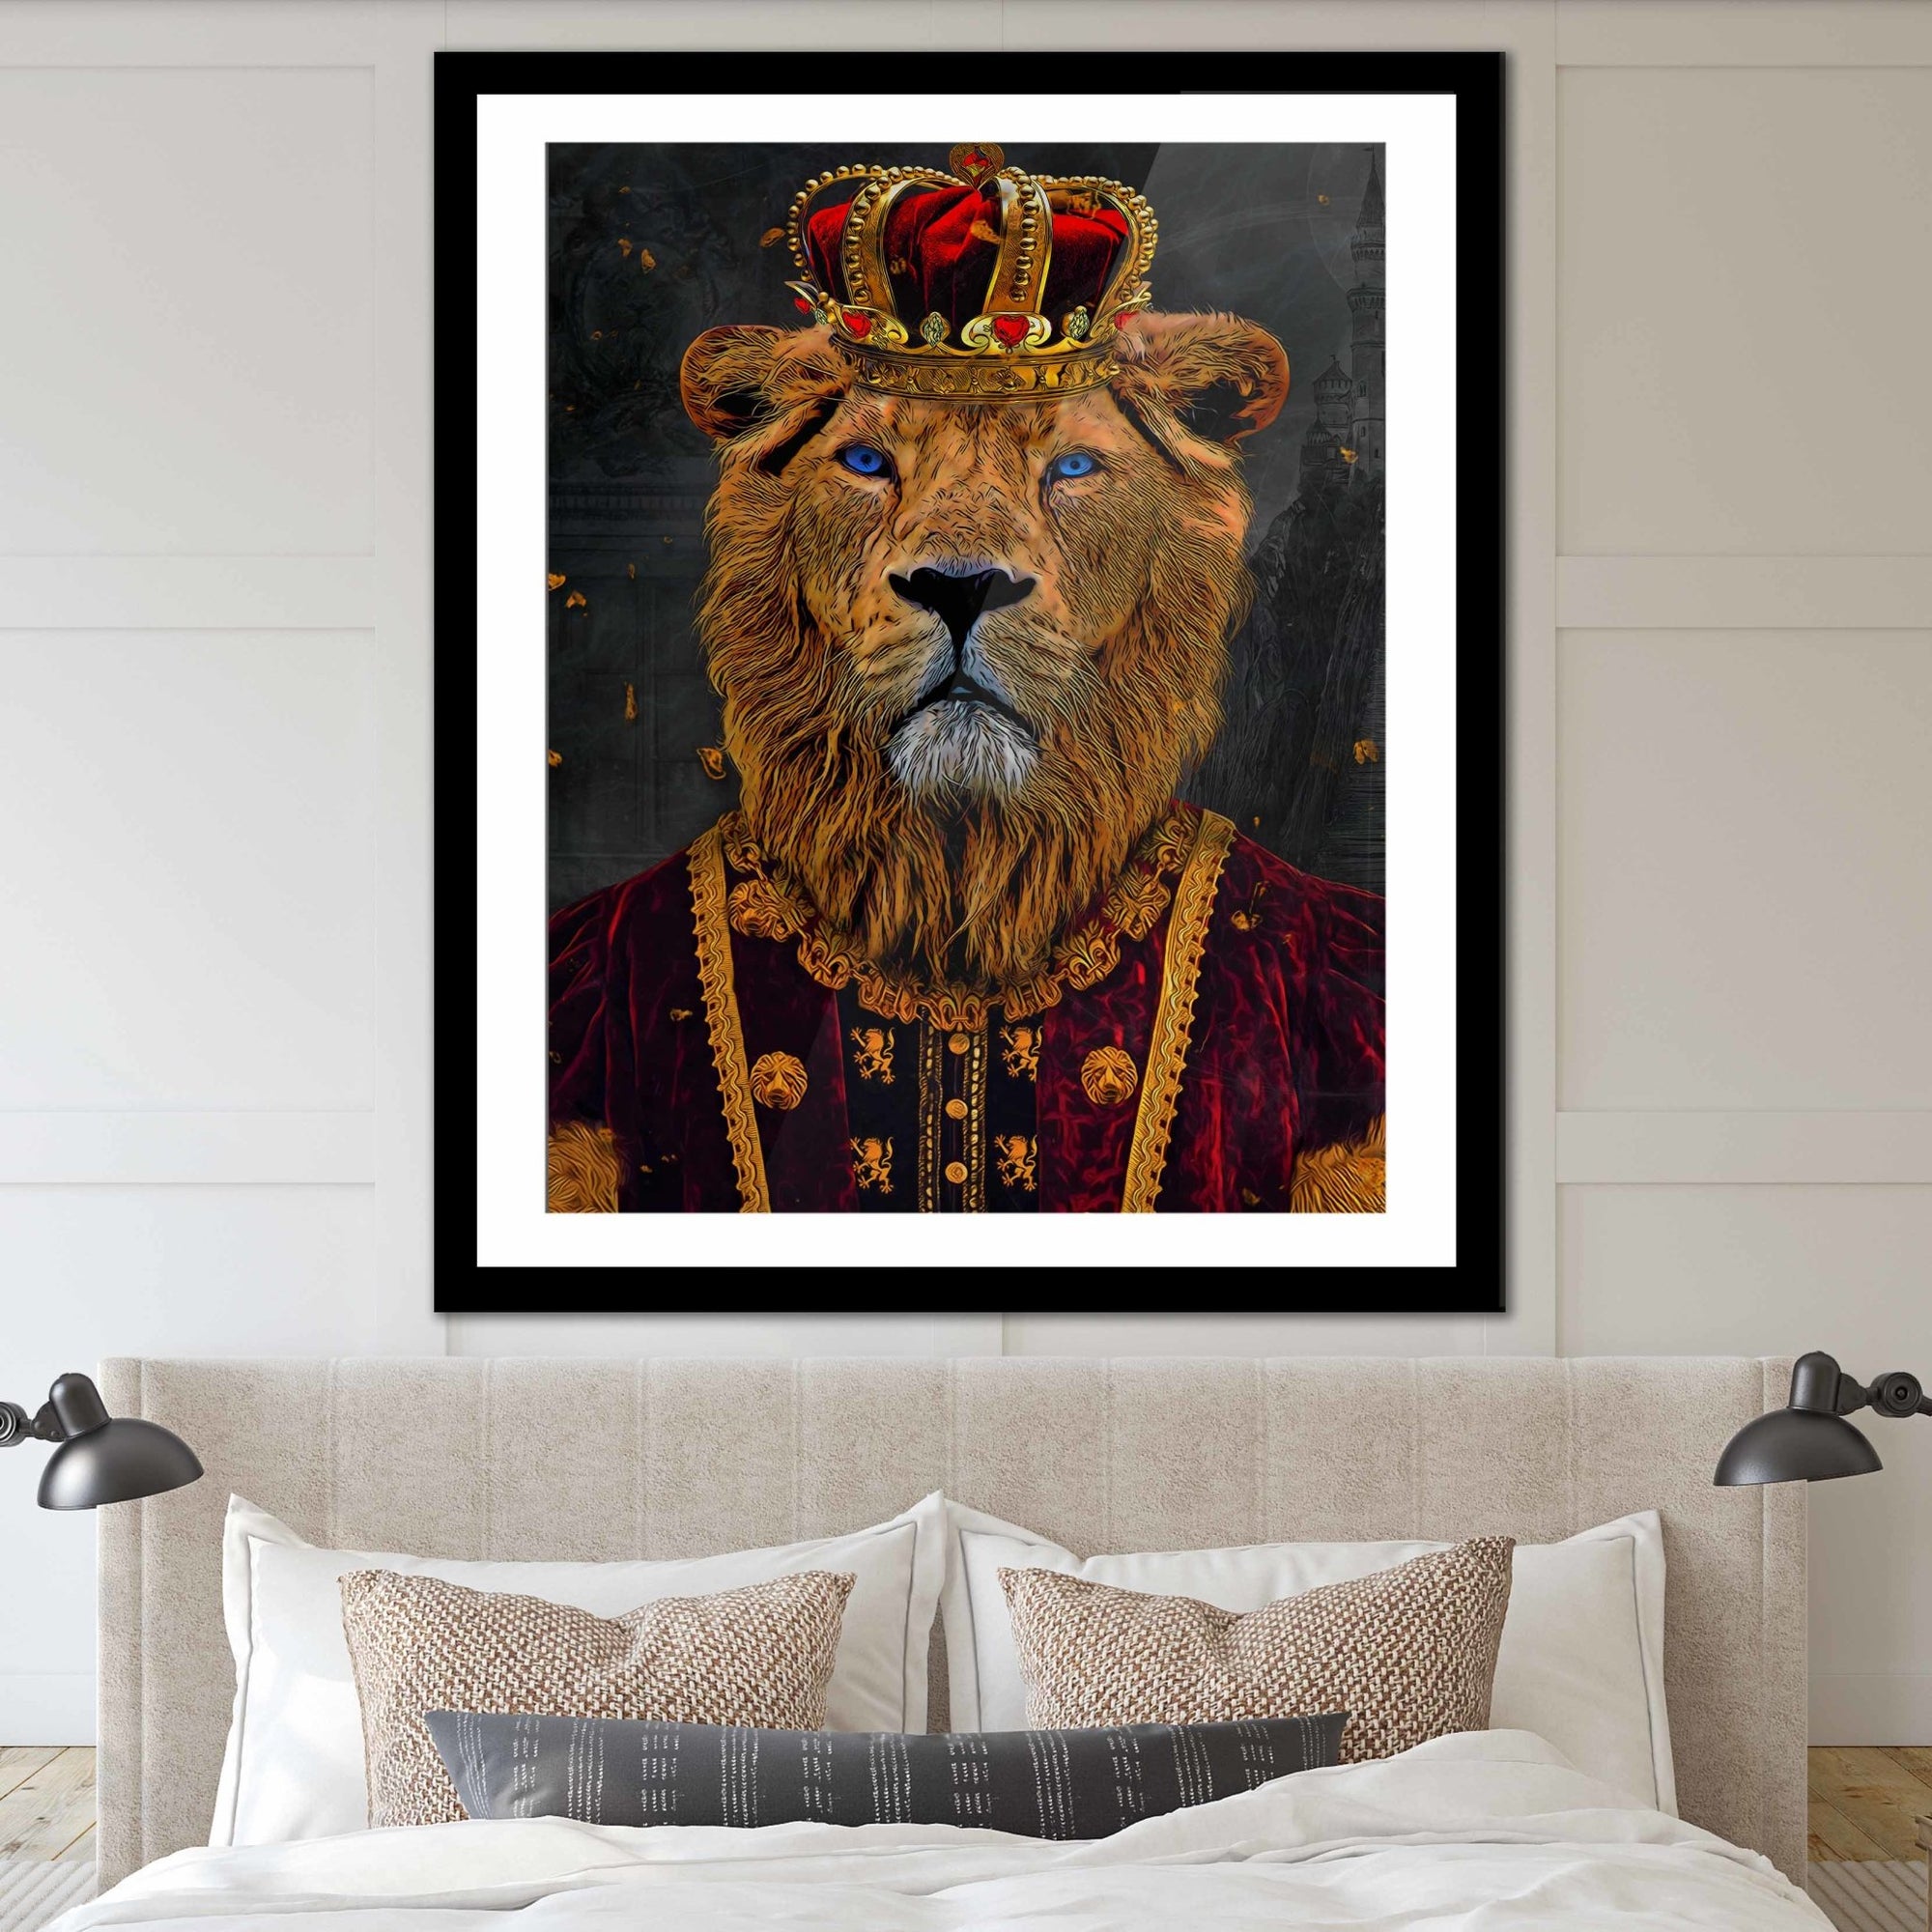 King of Lions Semi-gloss Print - Thedopeart Prints